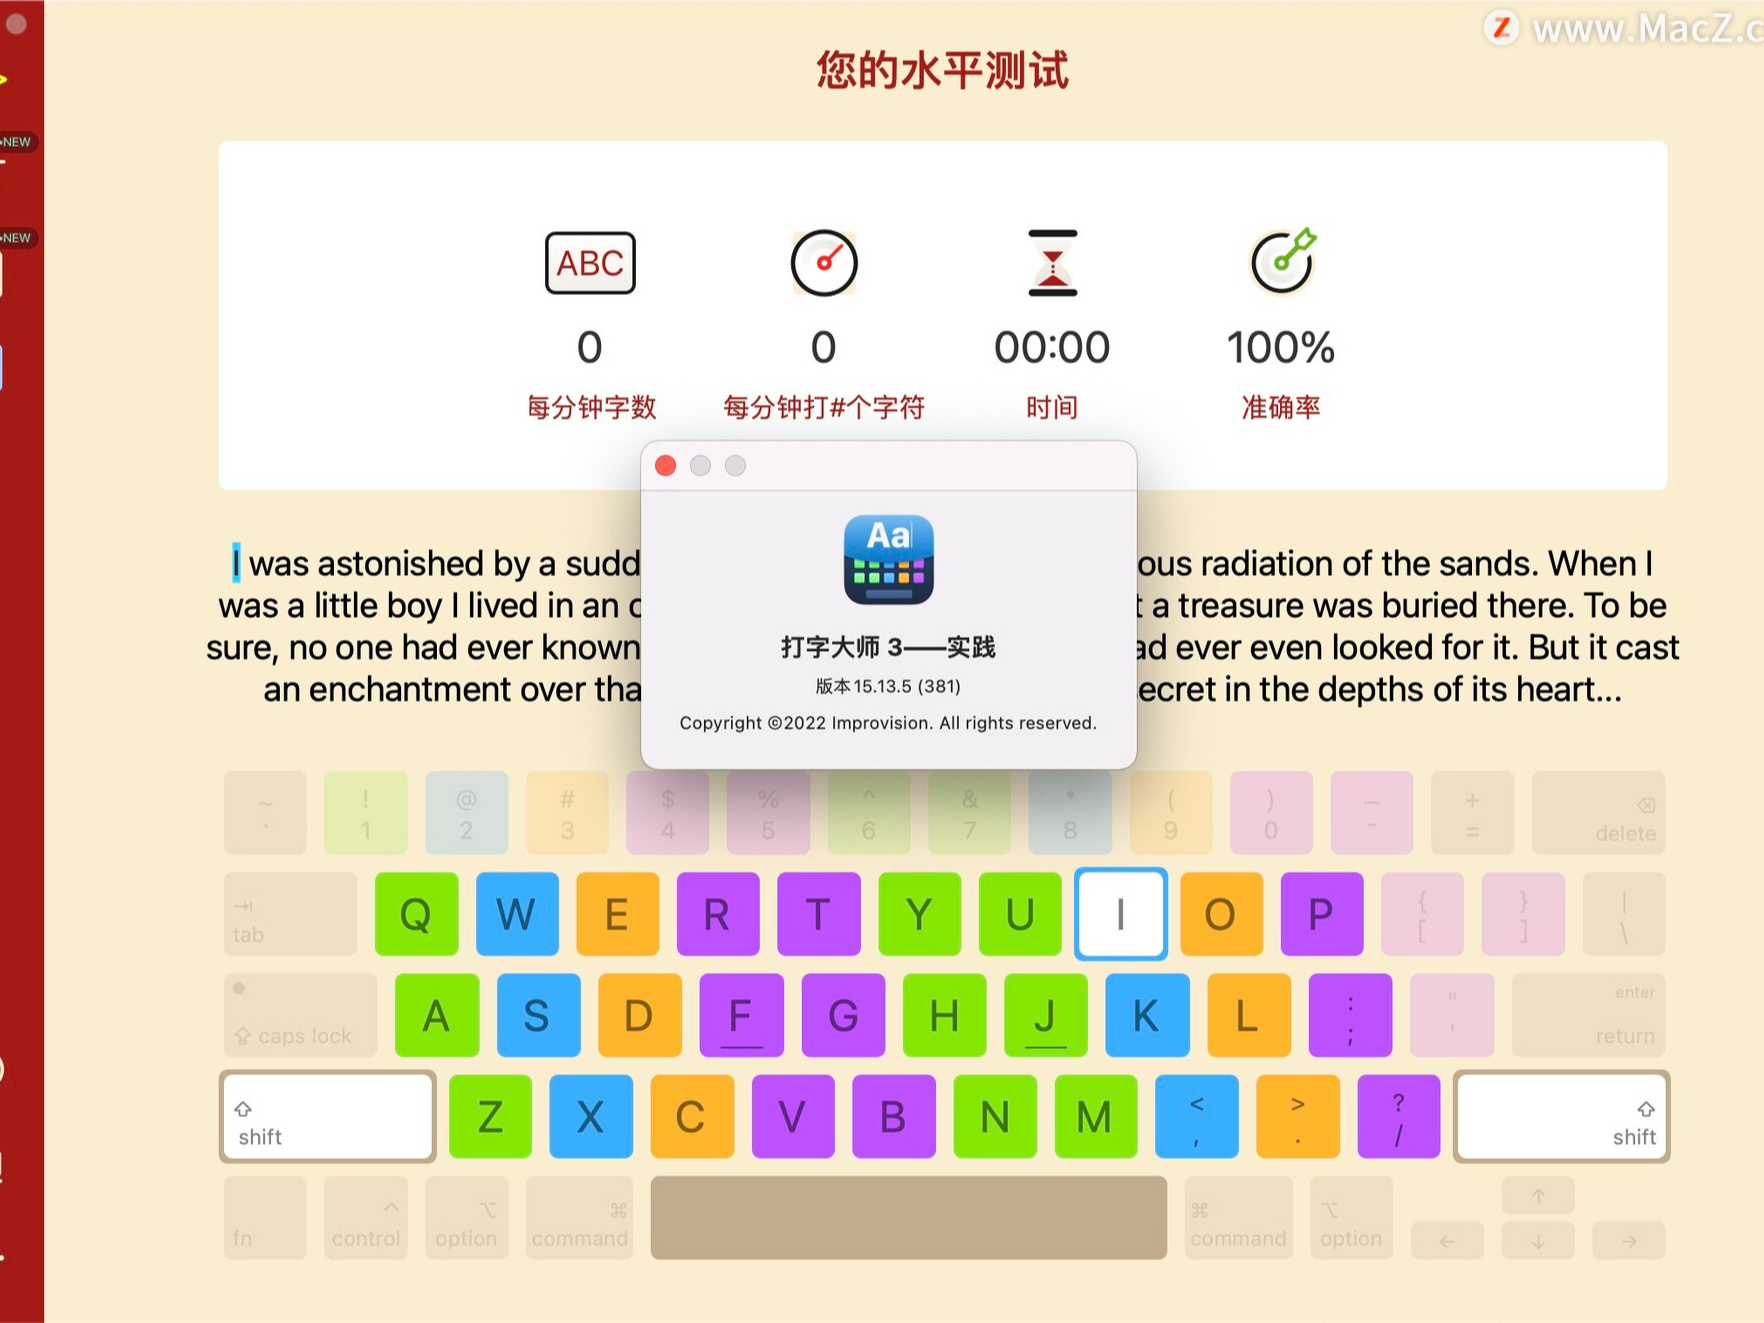 for mac download Master of Typing 3